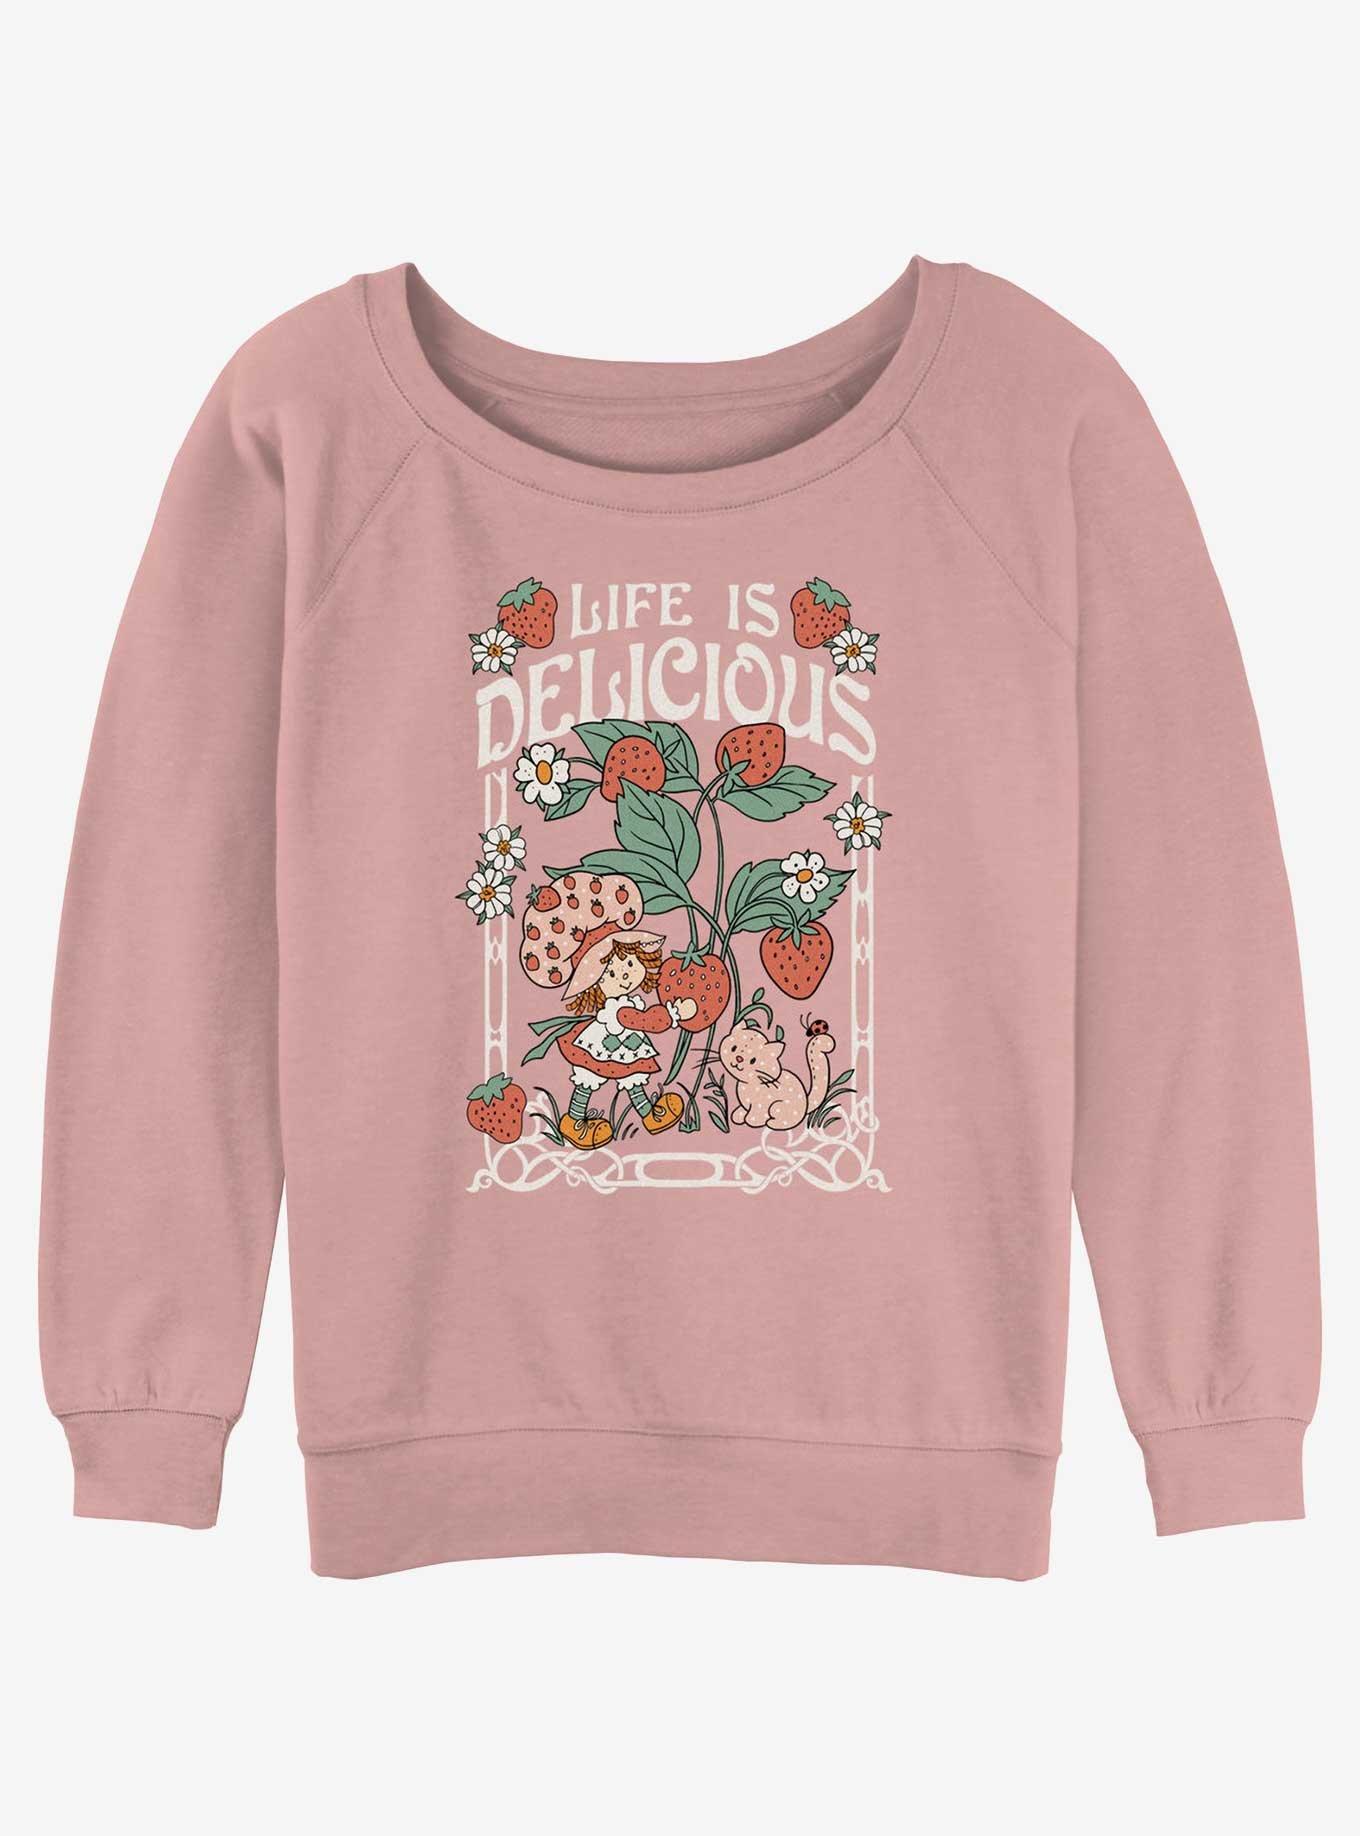 Strawberry Shortcake Life Is Delicious Poster Womens Slouchy Sweatshirt, DESERTPNK, hi-res